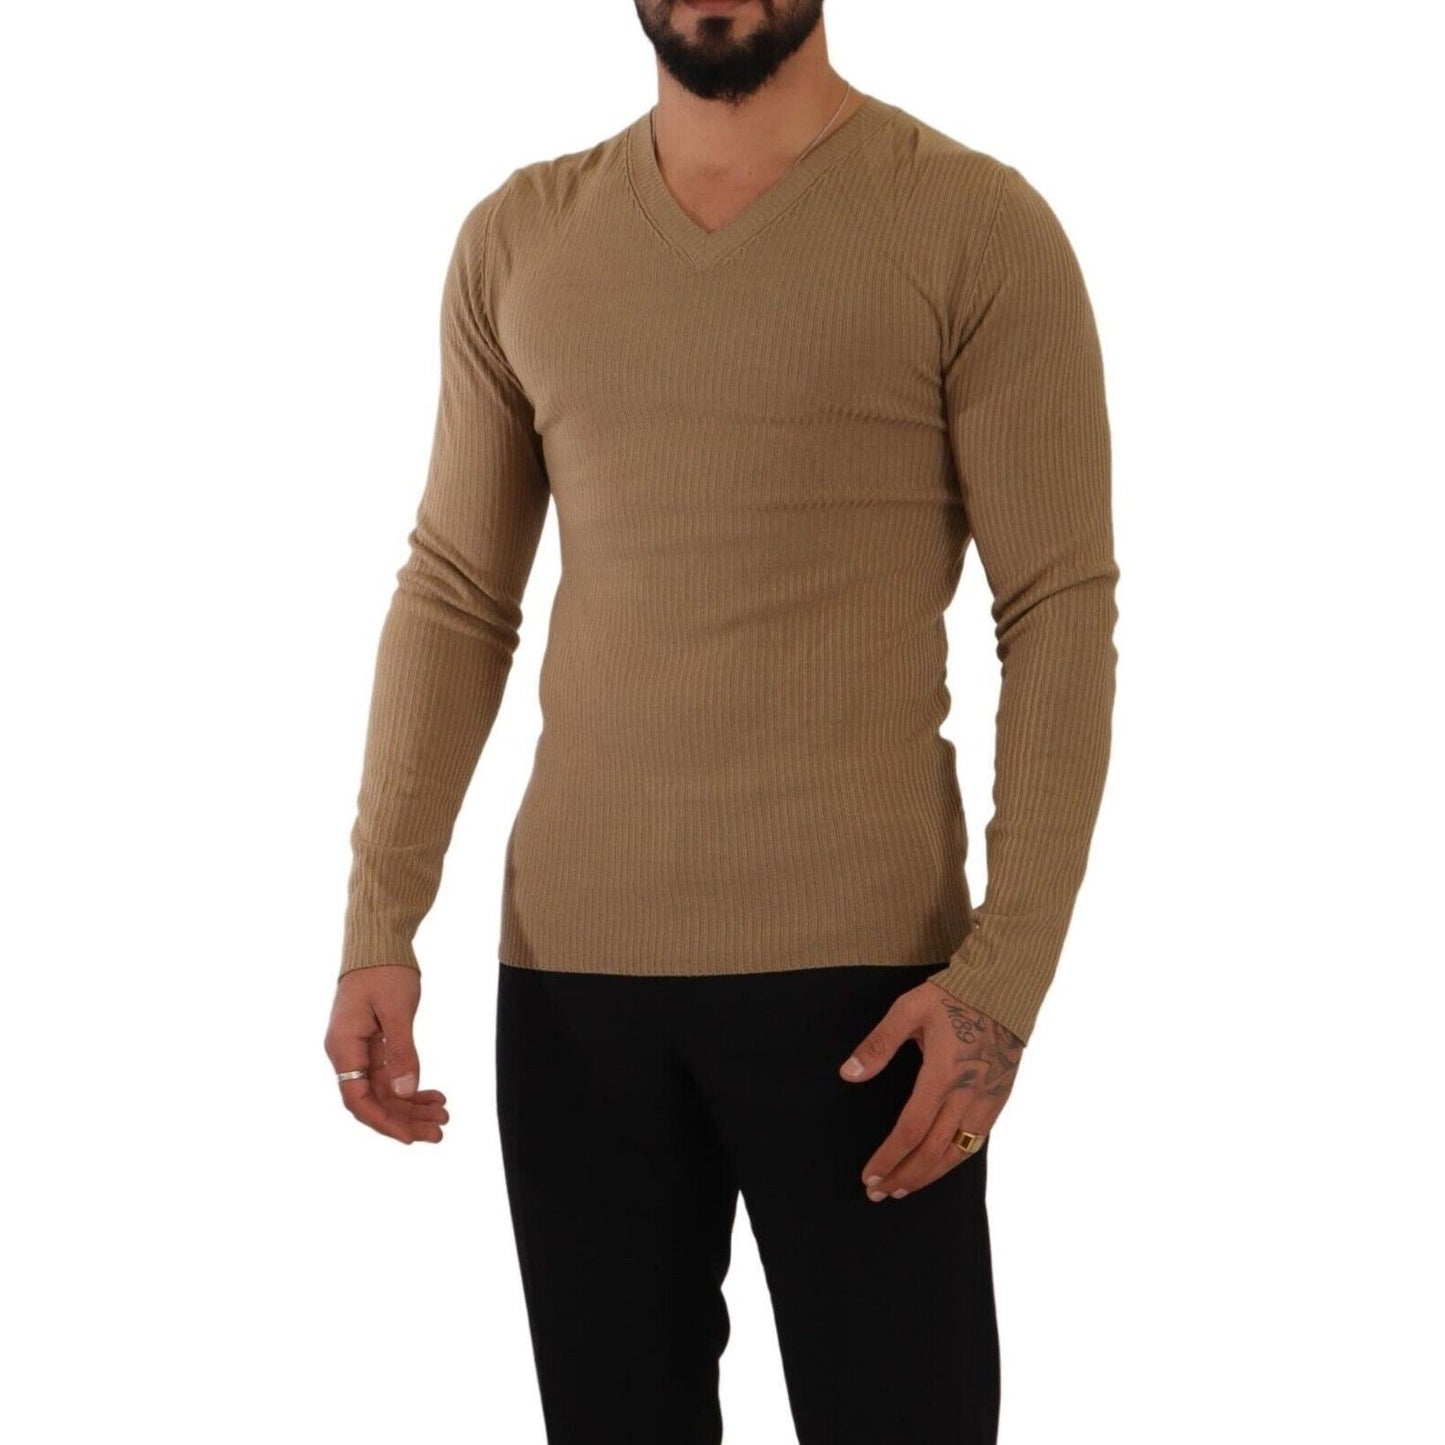 Ermanno Scervino Classic V-Neck Wool Sweater in Brown brown-wool-knit-v-neck-men-pullover-sweater s-l1600-64-1-2f3fe81a-8ab.jpg